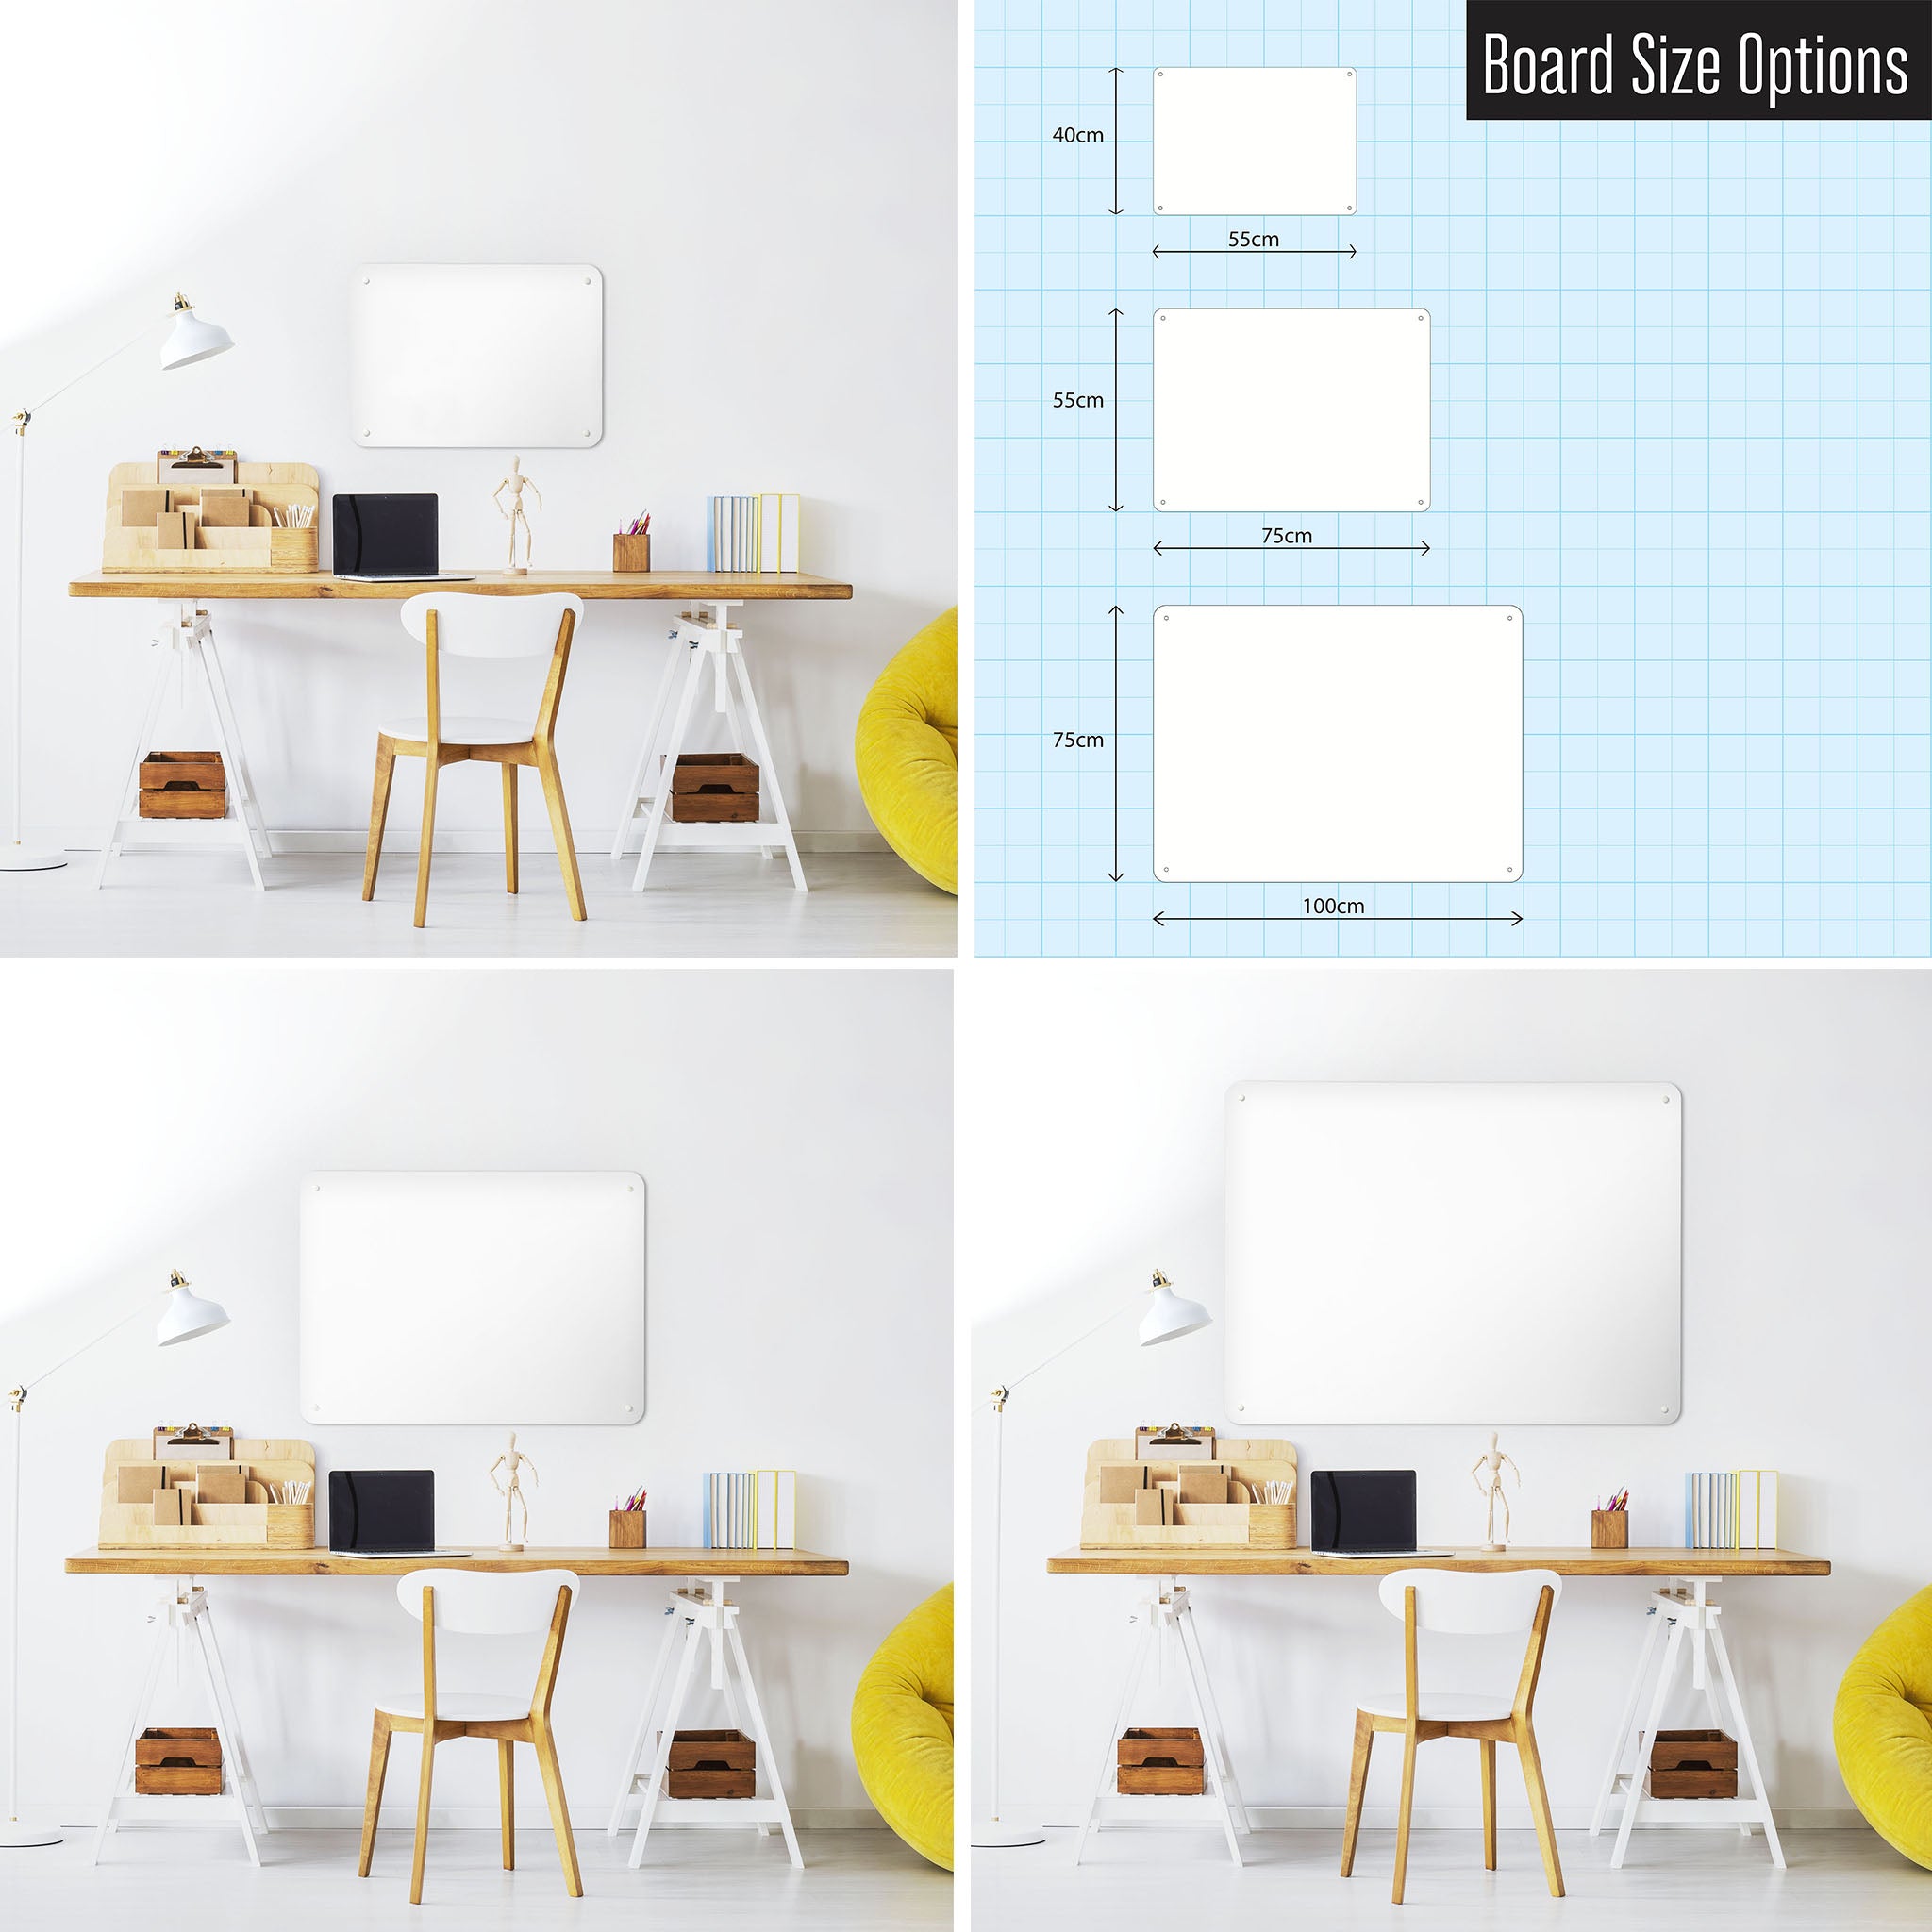 Three photographs of a workspace interior and a diagram to show size comparisons of a plain white magnetic notice board